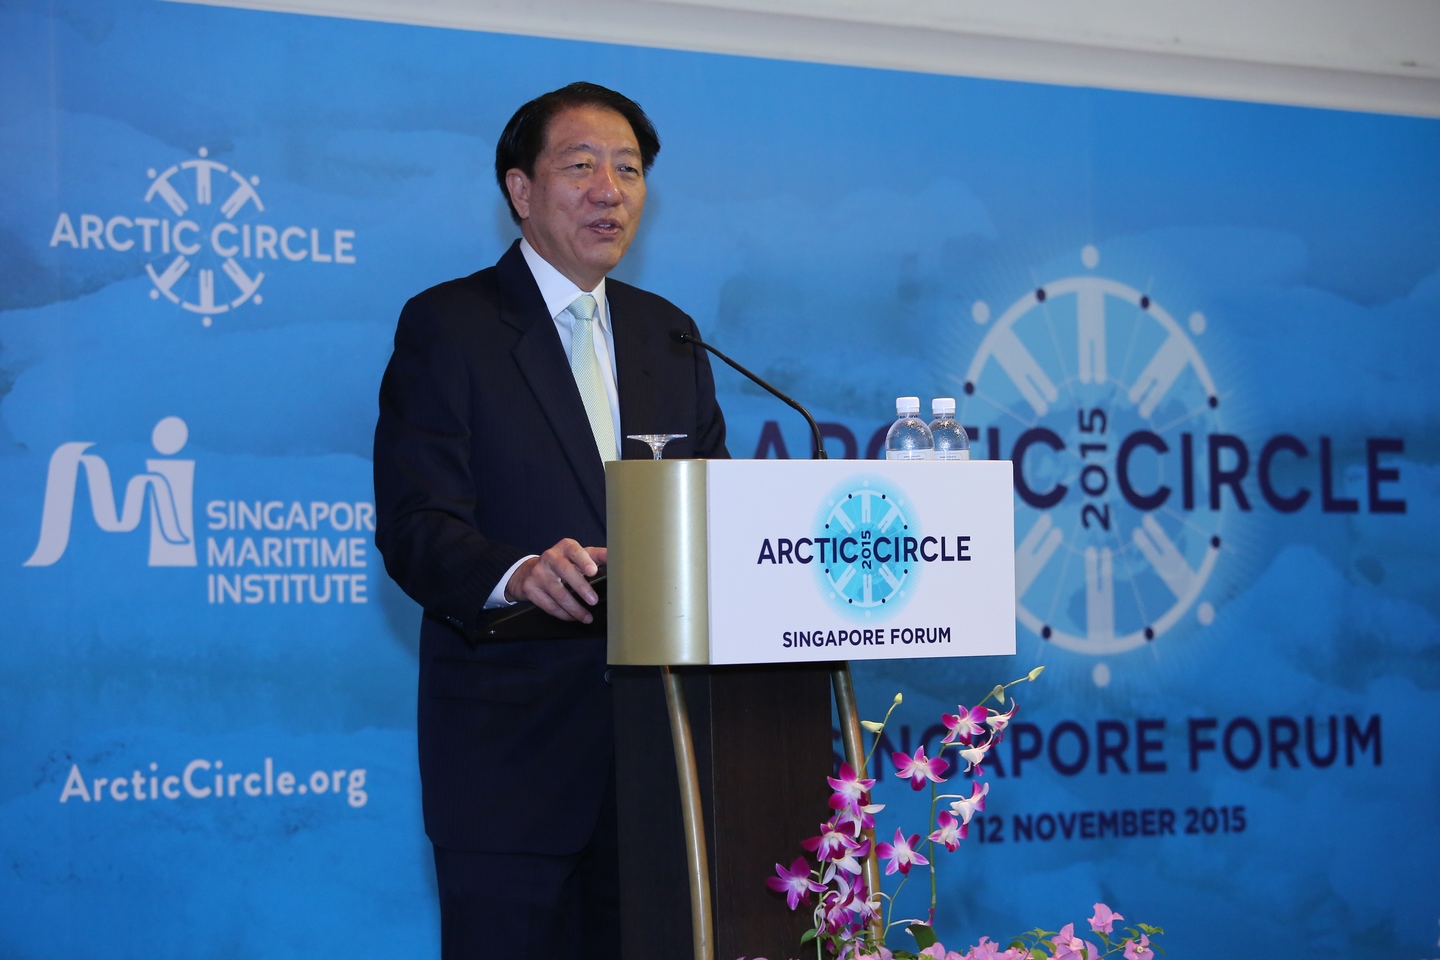 DPM Teo Chee Hean speaking at the Opening Session of the Arctic Circle 